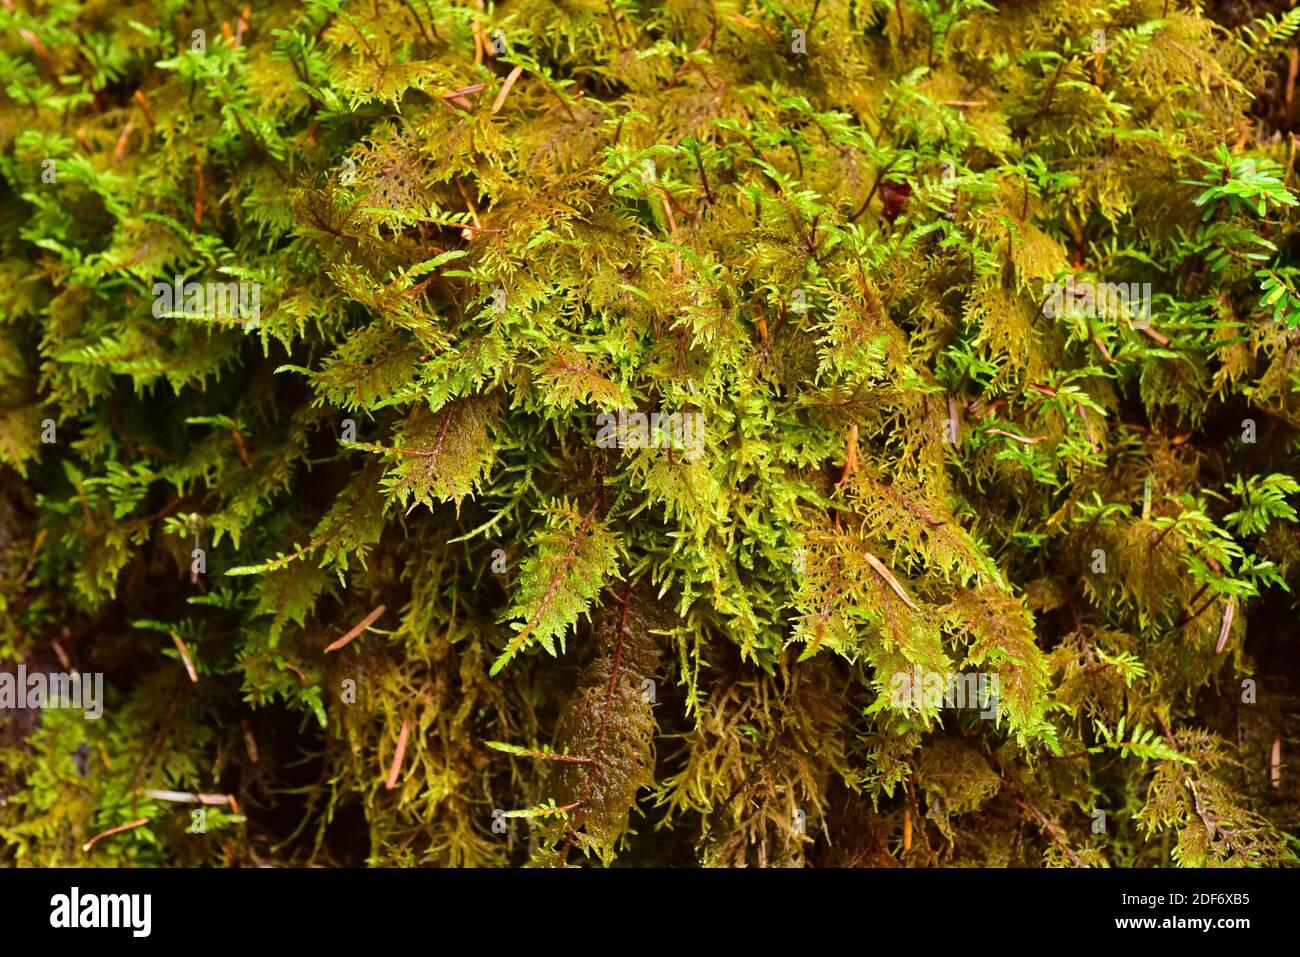 glittering-wood-moss-or-mountain-fern-moss-hylocomium-splendens-is-a-moss-native-to-boreal-forests-this-photo-was-taken-in-valle-de-aran-lleida-2DF6XB5.jpg